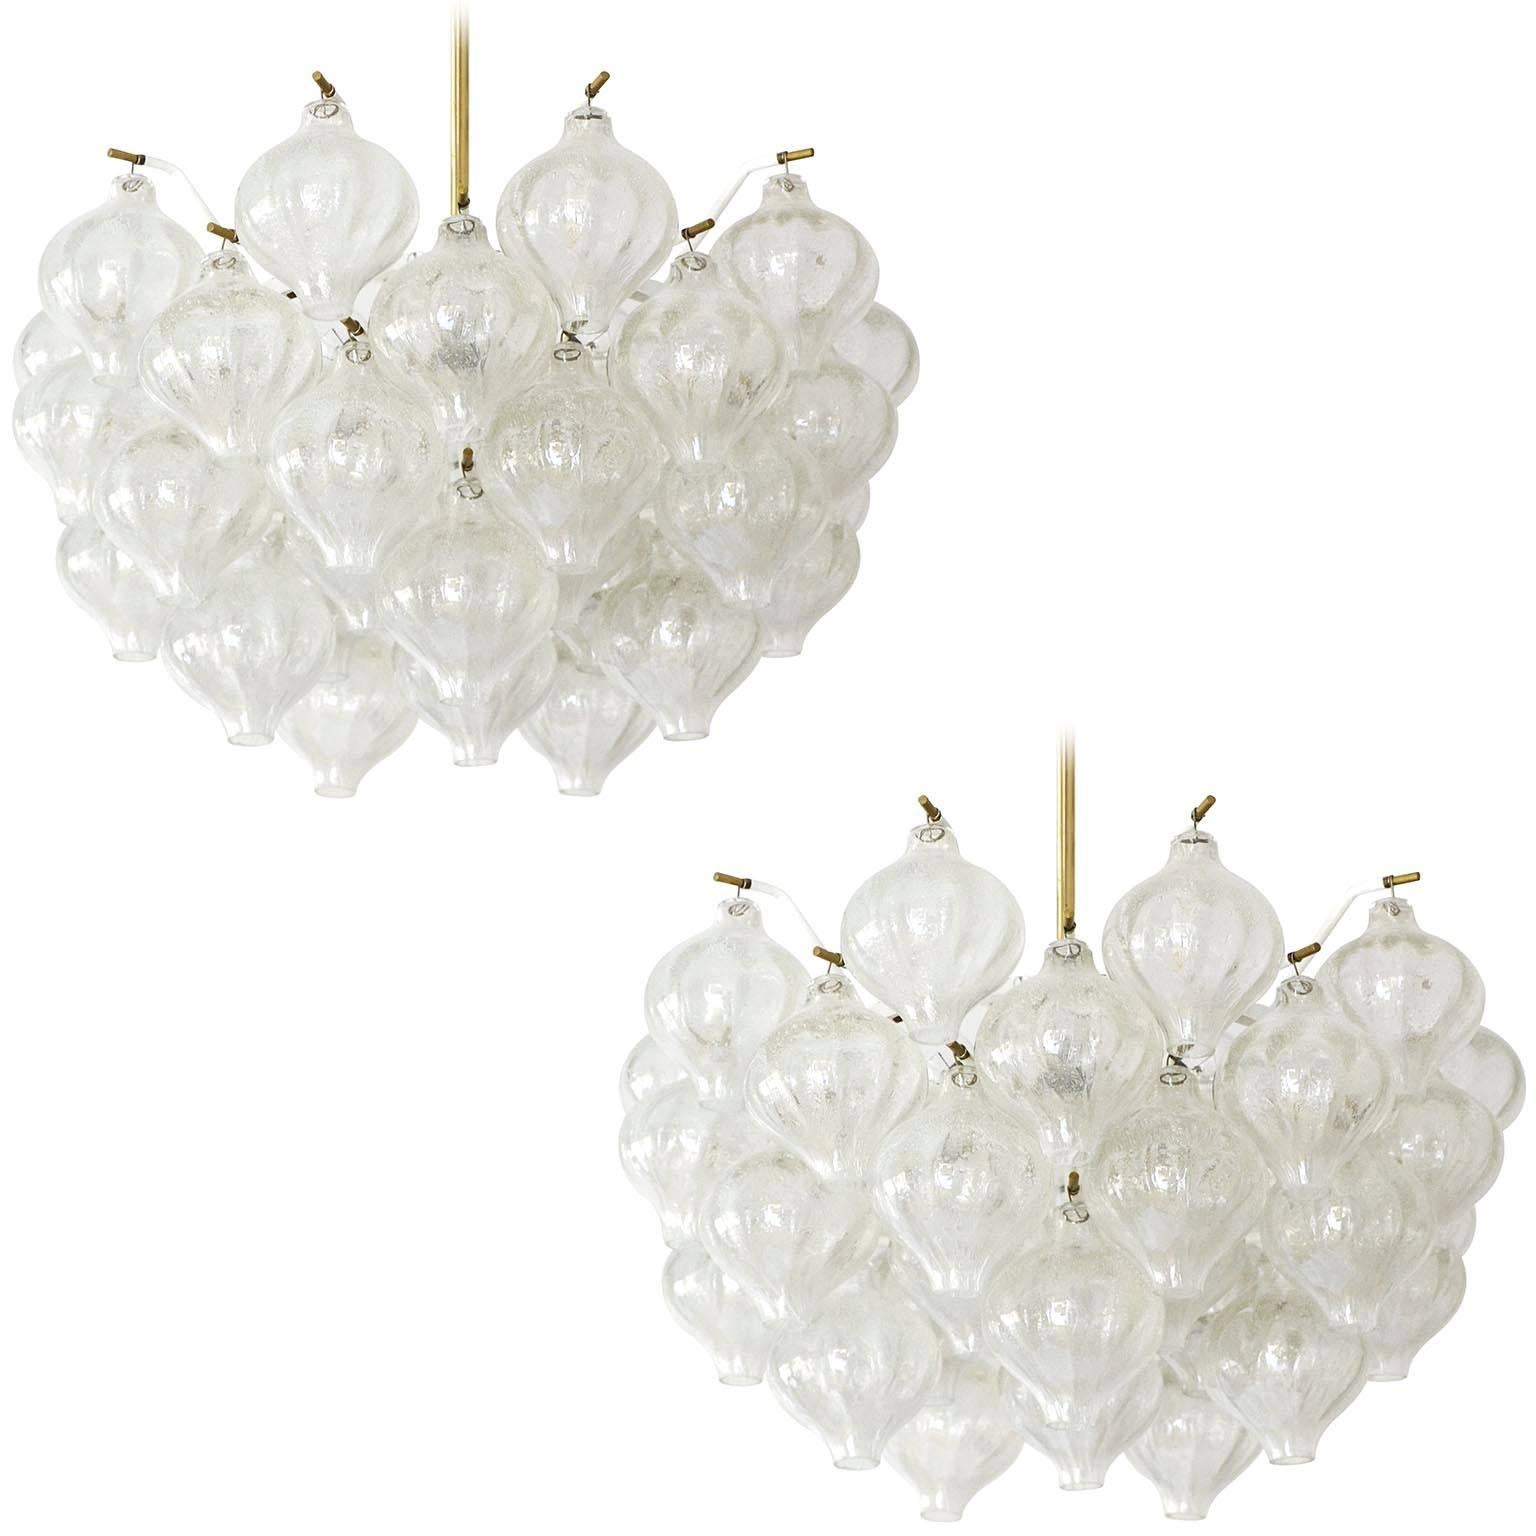 A set of three fantastic light fixtures model Tulipan by J.T. Kalmar, Vienna, Austria, manufactured in midcentury, circa 1970 (late 1960s-early 1970s).
The name Tulipan derives from the tulip shaped handblown bubble glasses. Each glass is handmade